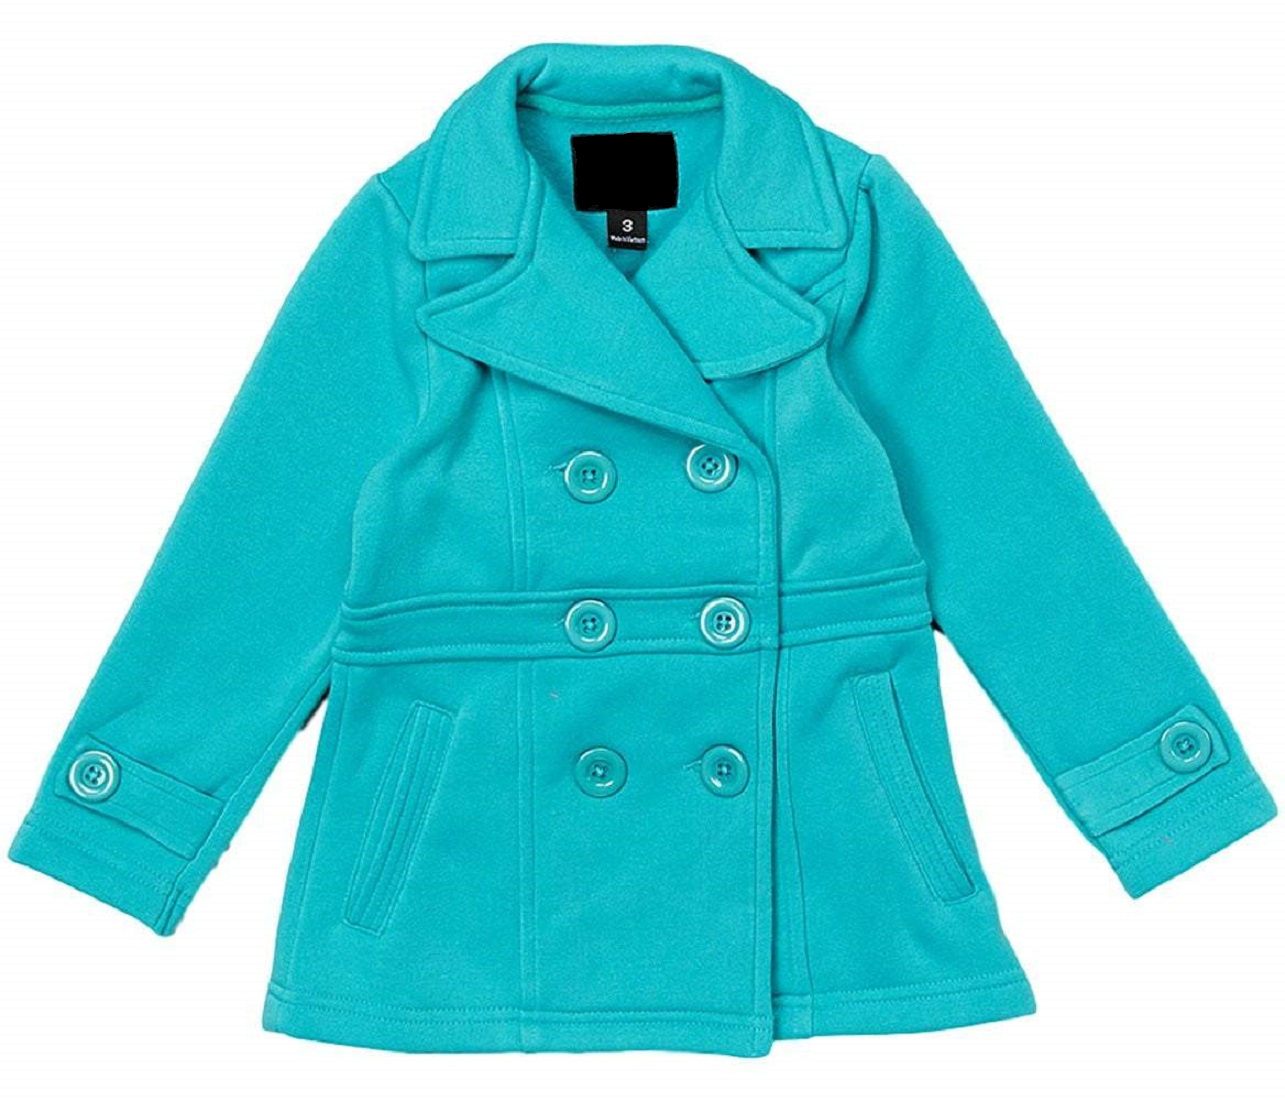 Girl's Fleece Double Breasted Button Polyester Solid Winter Pea Coat Jacket - image 1 of 1